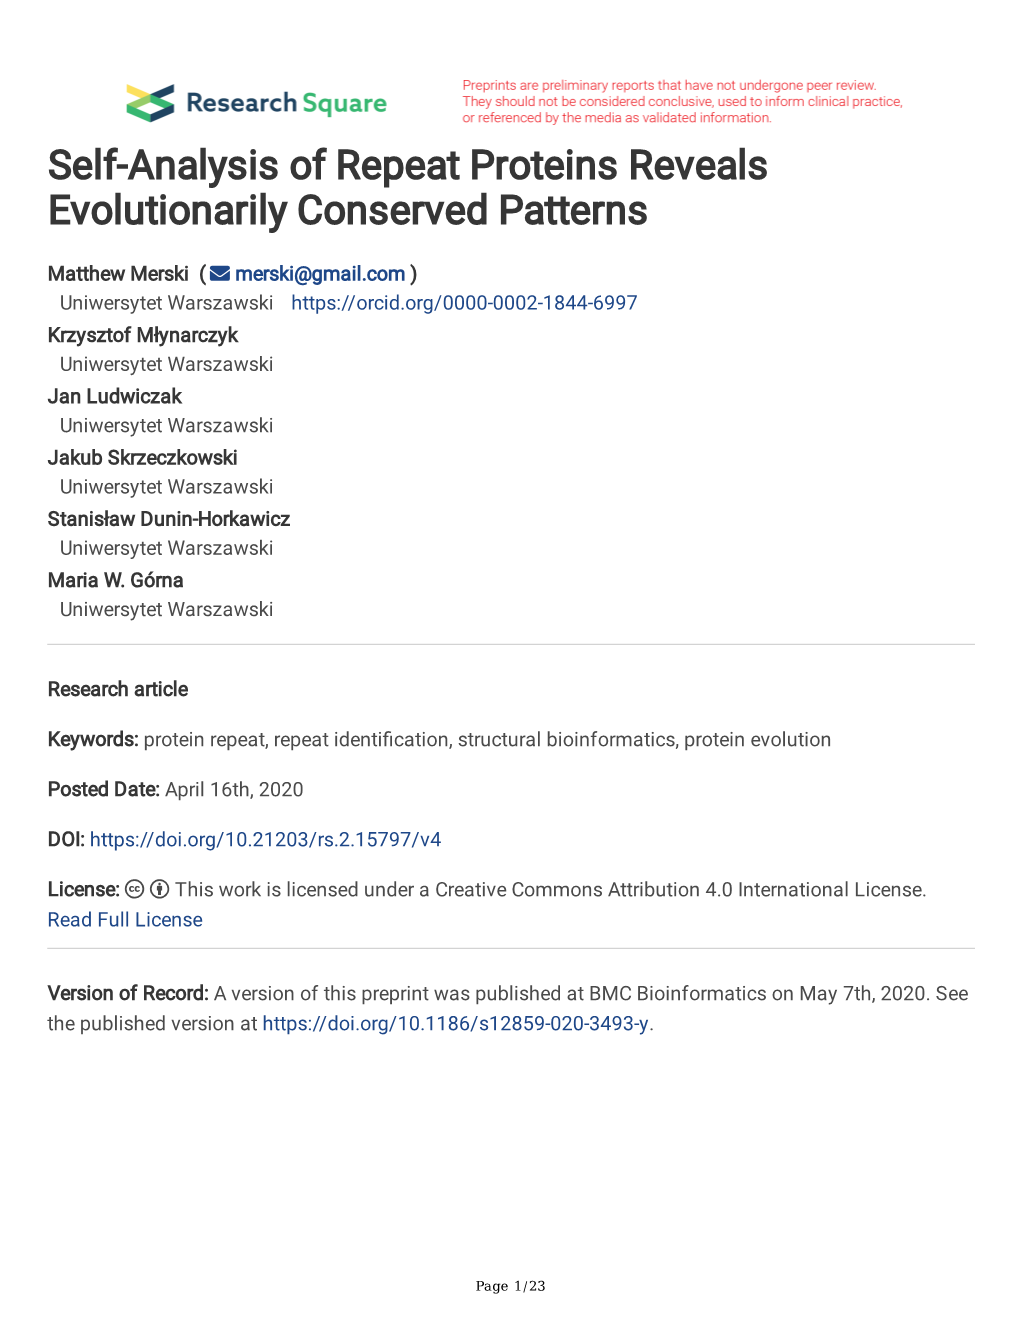 Self-Analysis of Repeat Proteins Reveals Evolutionarily Conserved Patterns